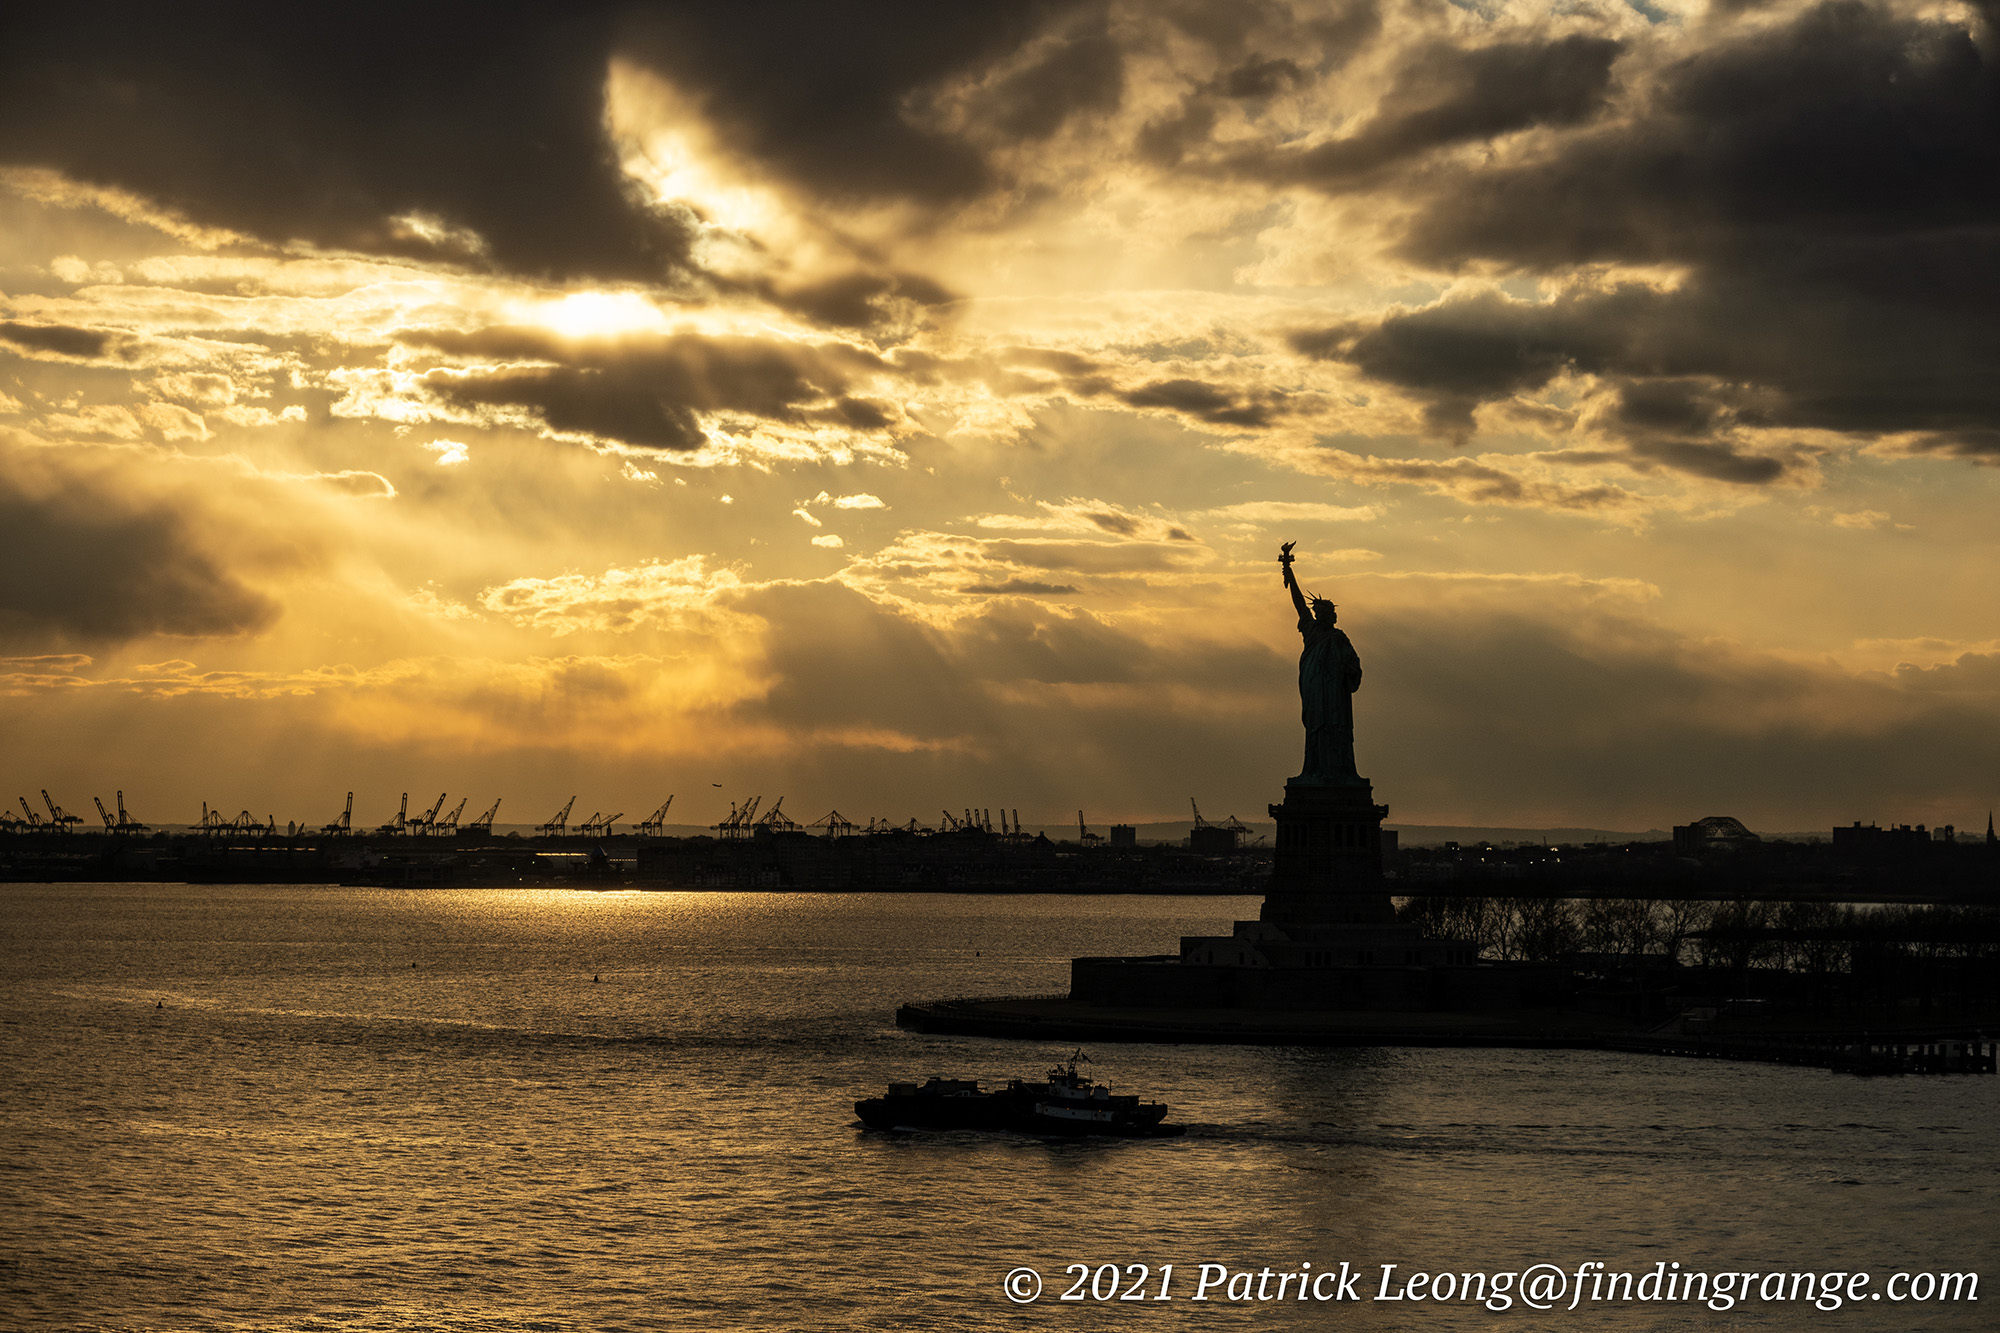 Fuji XF 18-55mm f2.8-4 and X-T3: Afternoon Cityscape Shots of NYC